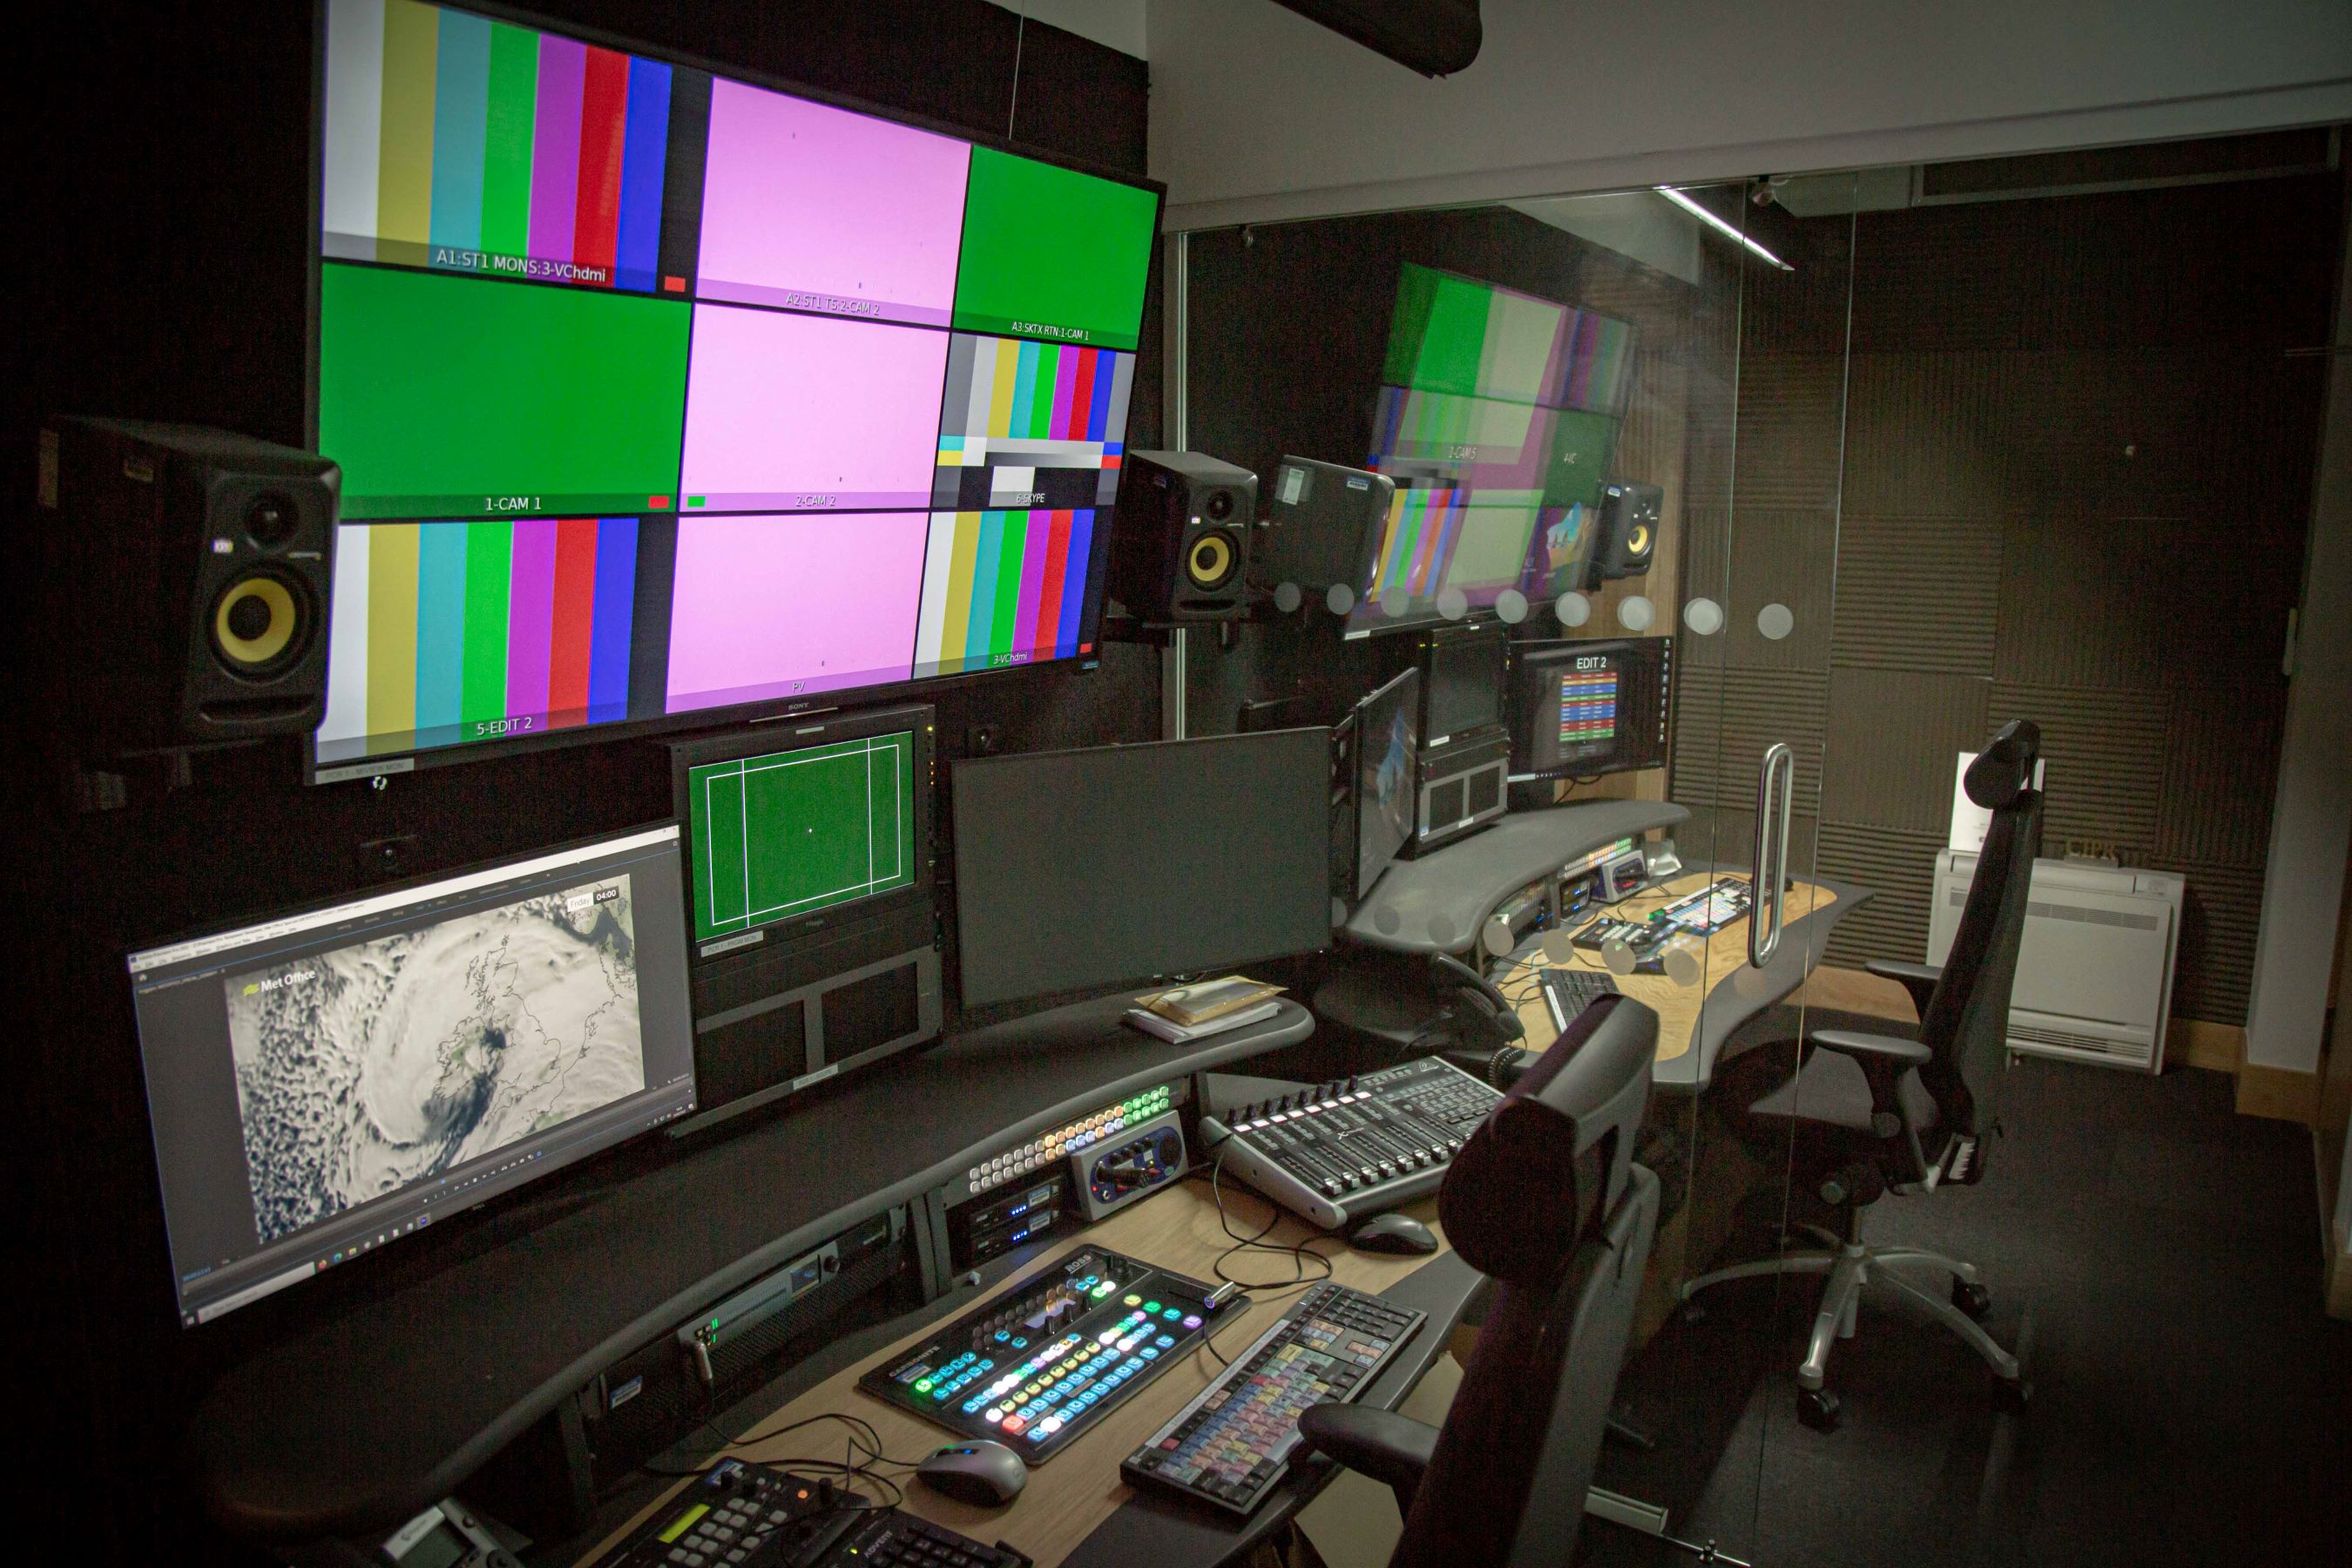 Behind the scenes in the Met Office studio, with multiple computer screens on the production desk